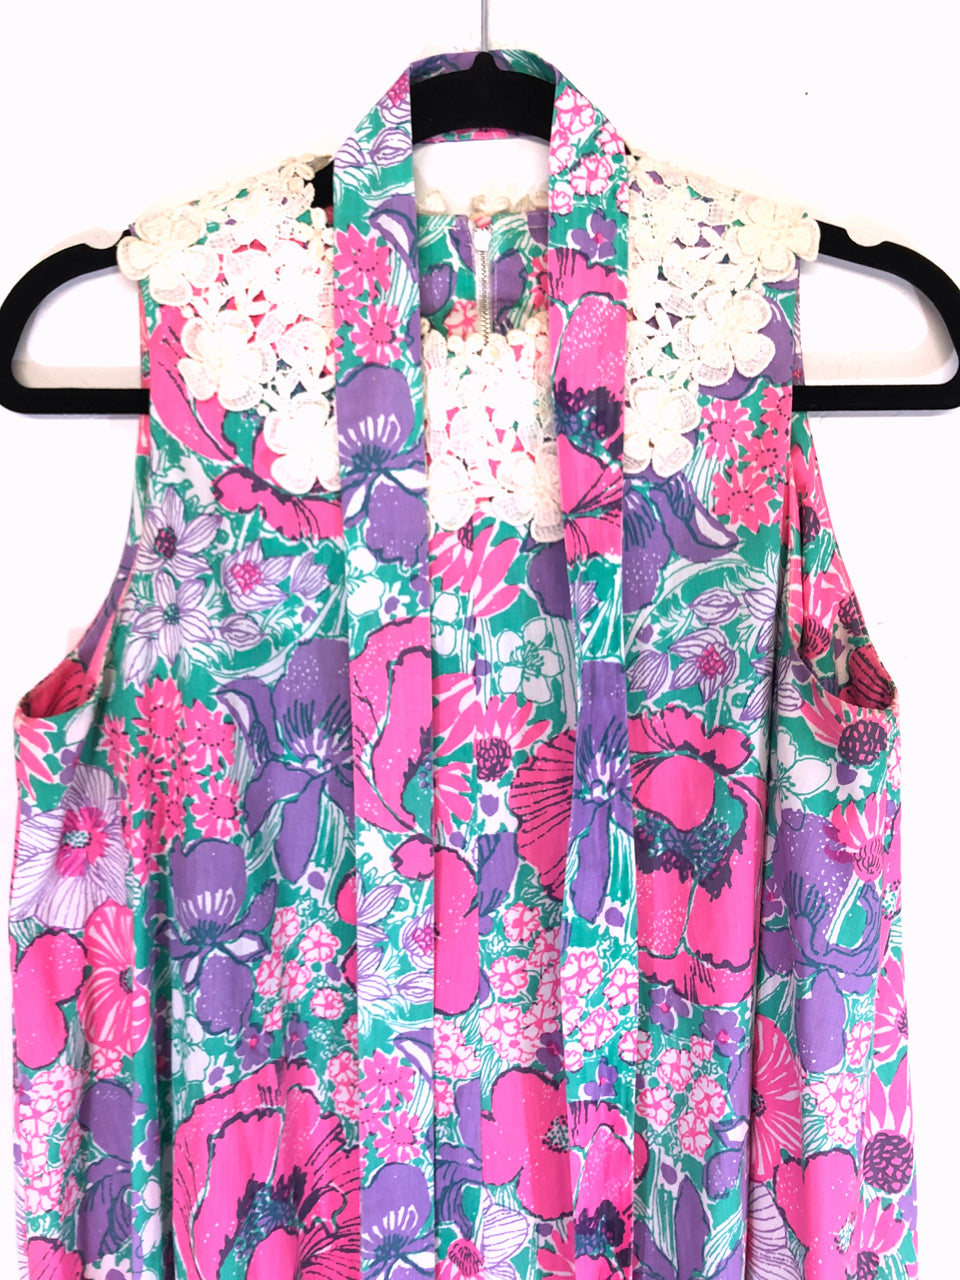 The Lilly Lilly Pulitzer Floral Maxi Dress with Belt